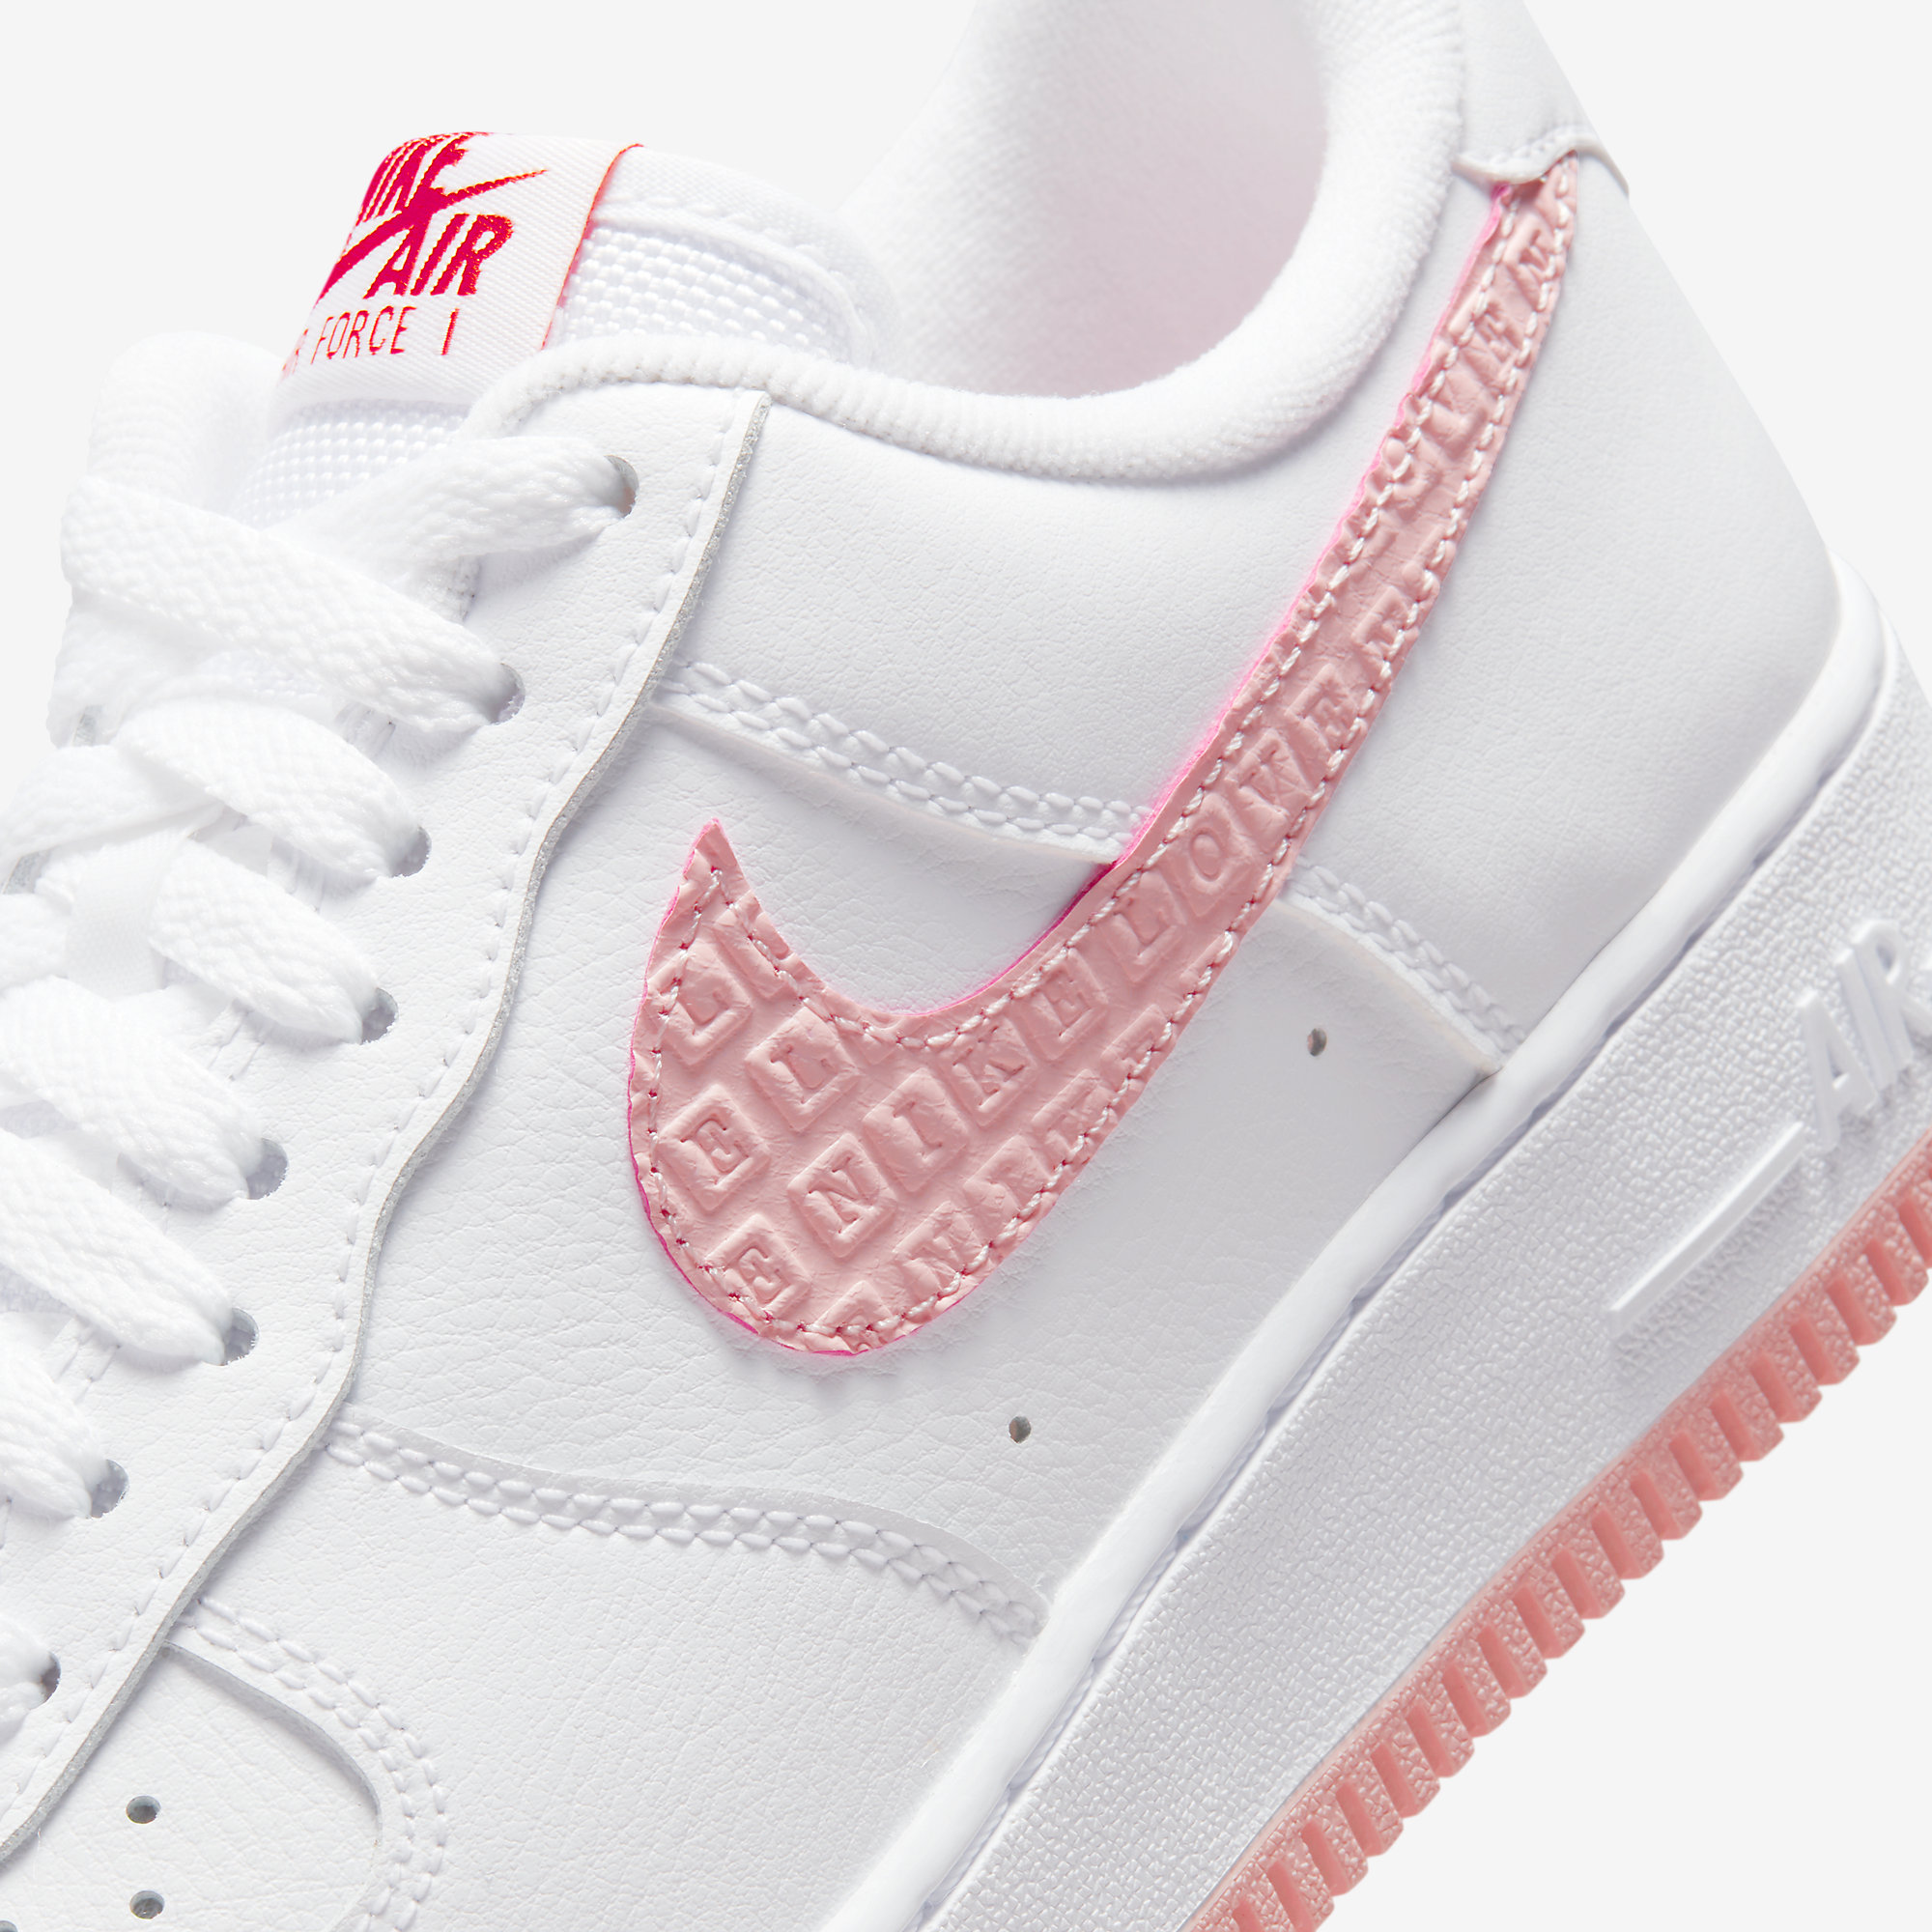 GIÀY THỂ THAO NỮ NIKE AIR FORCE 1 07 LOW VD VALENTINE´S DAY WHITE ATMOSPHERE UNIVERSITY RED SAIL DQ9320-100 17